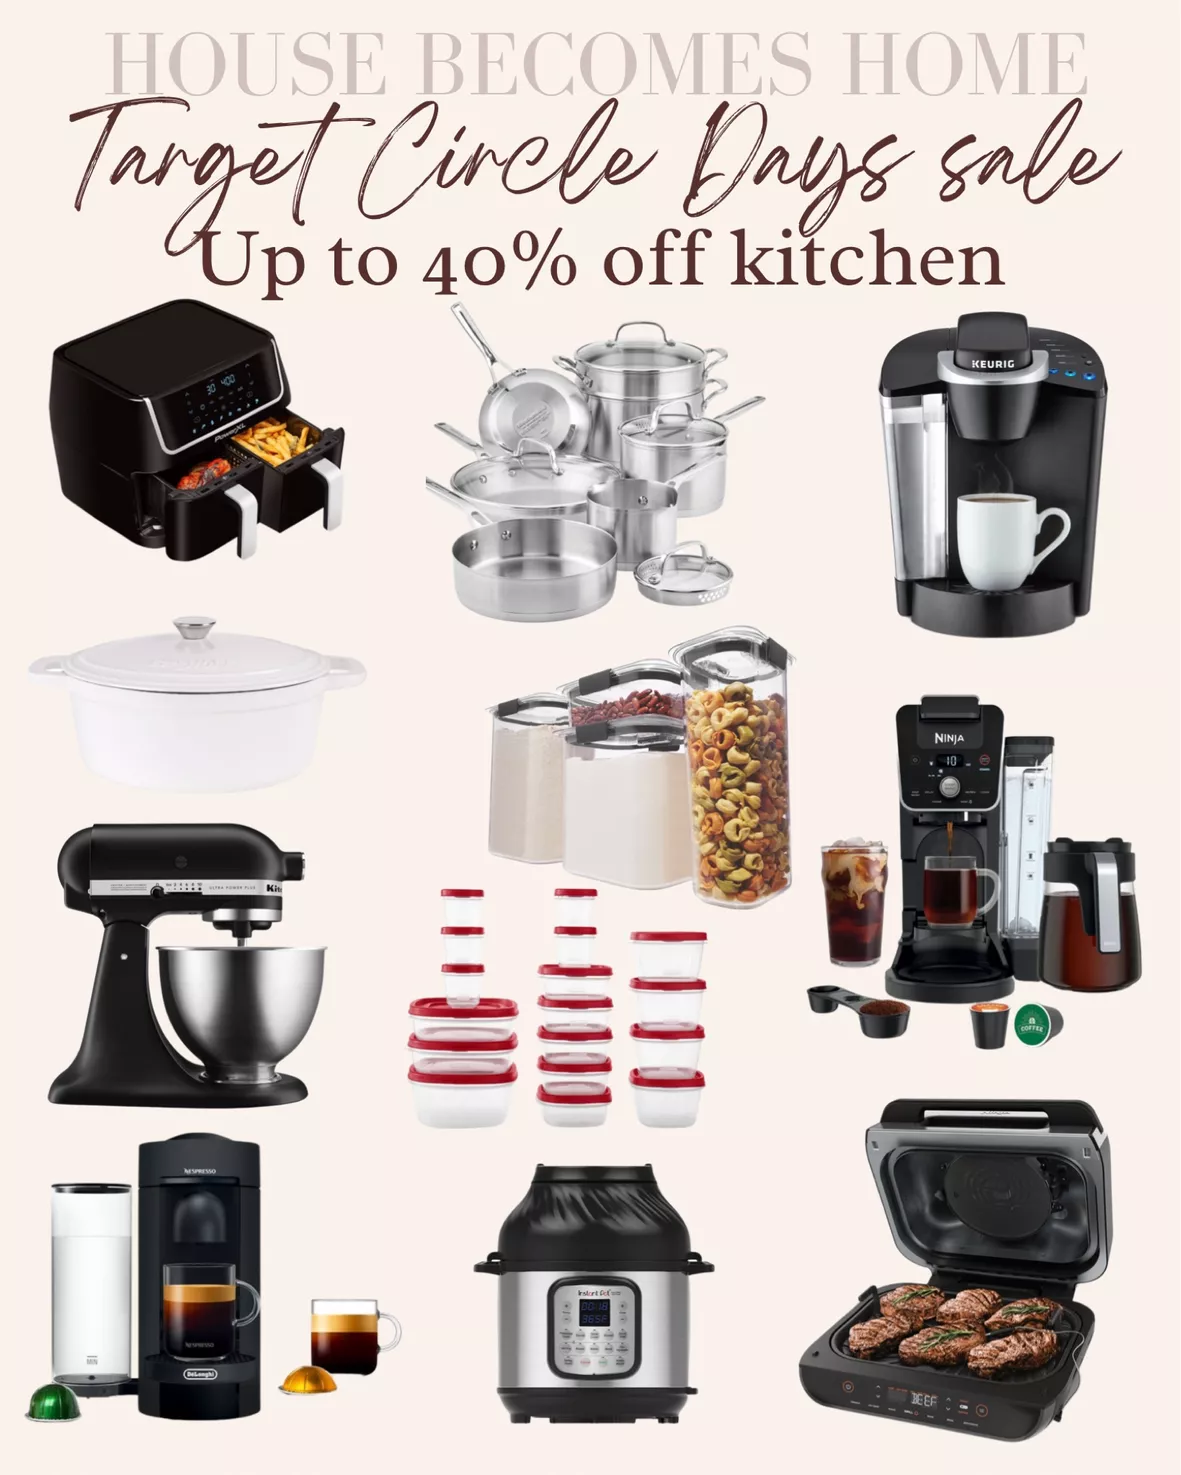 New Target kitchen sale: Up to 50% off PowerXL air fryers, Keurig K-Duo,  cookware!